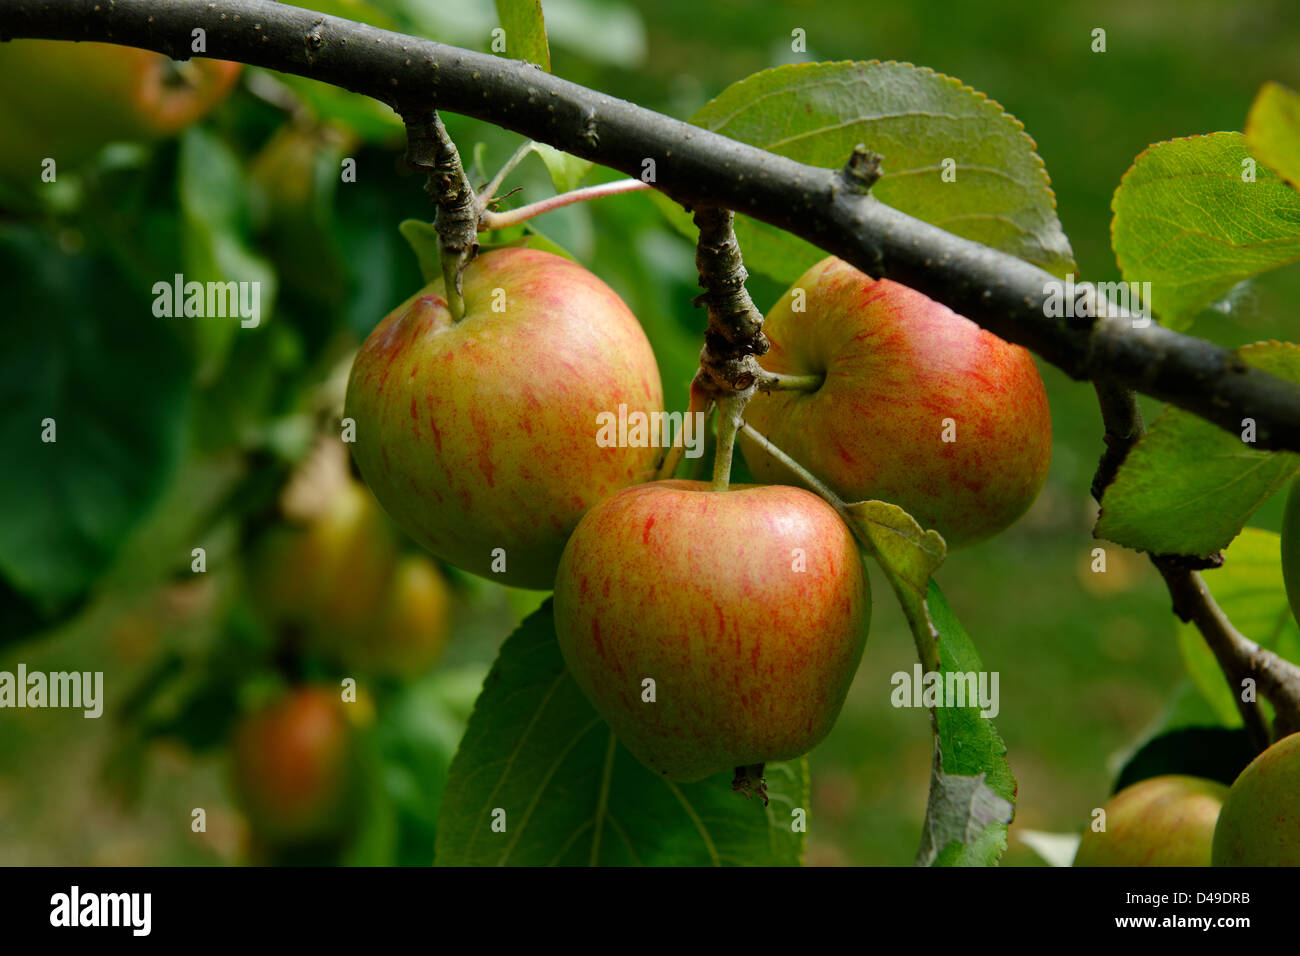 Ripe Laxton's Superb apples ready for harvesting UK Stock Photo